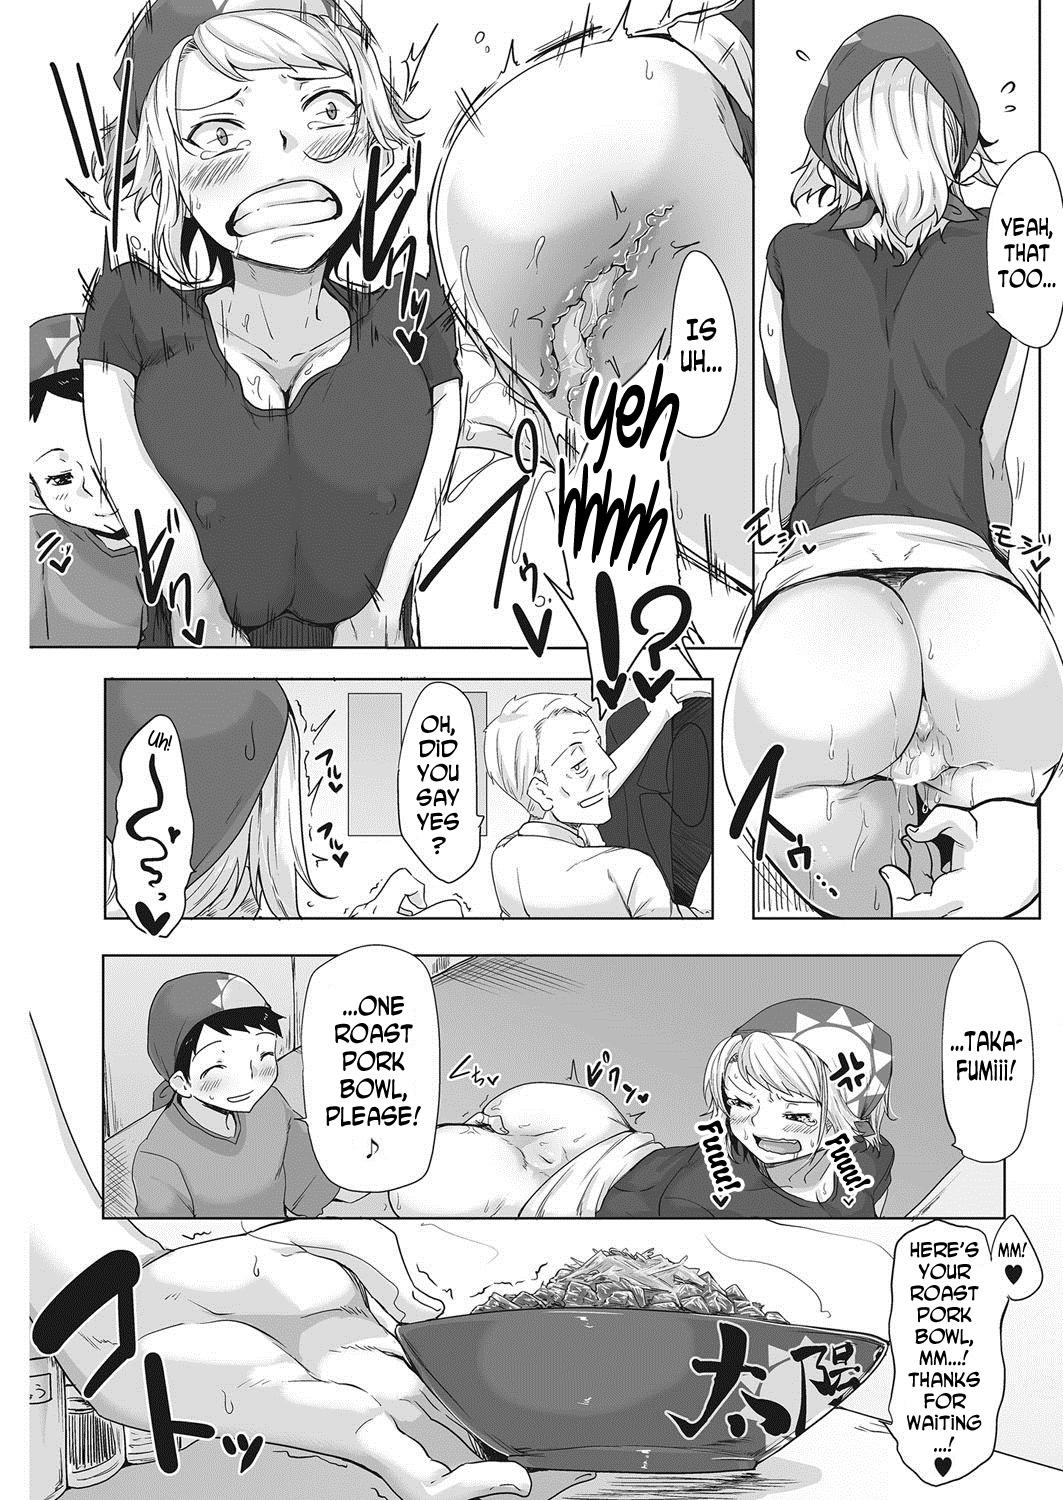 Bra Youkoso Taiyouken e! | Welcome to Taiyouken Gay Fetish - Page 9